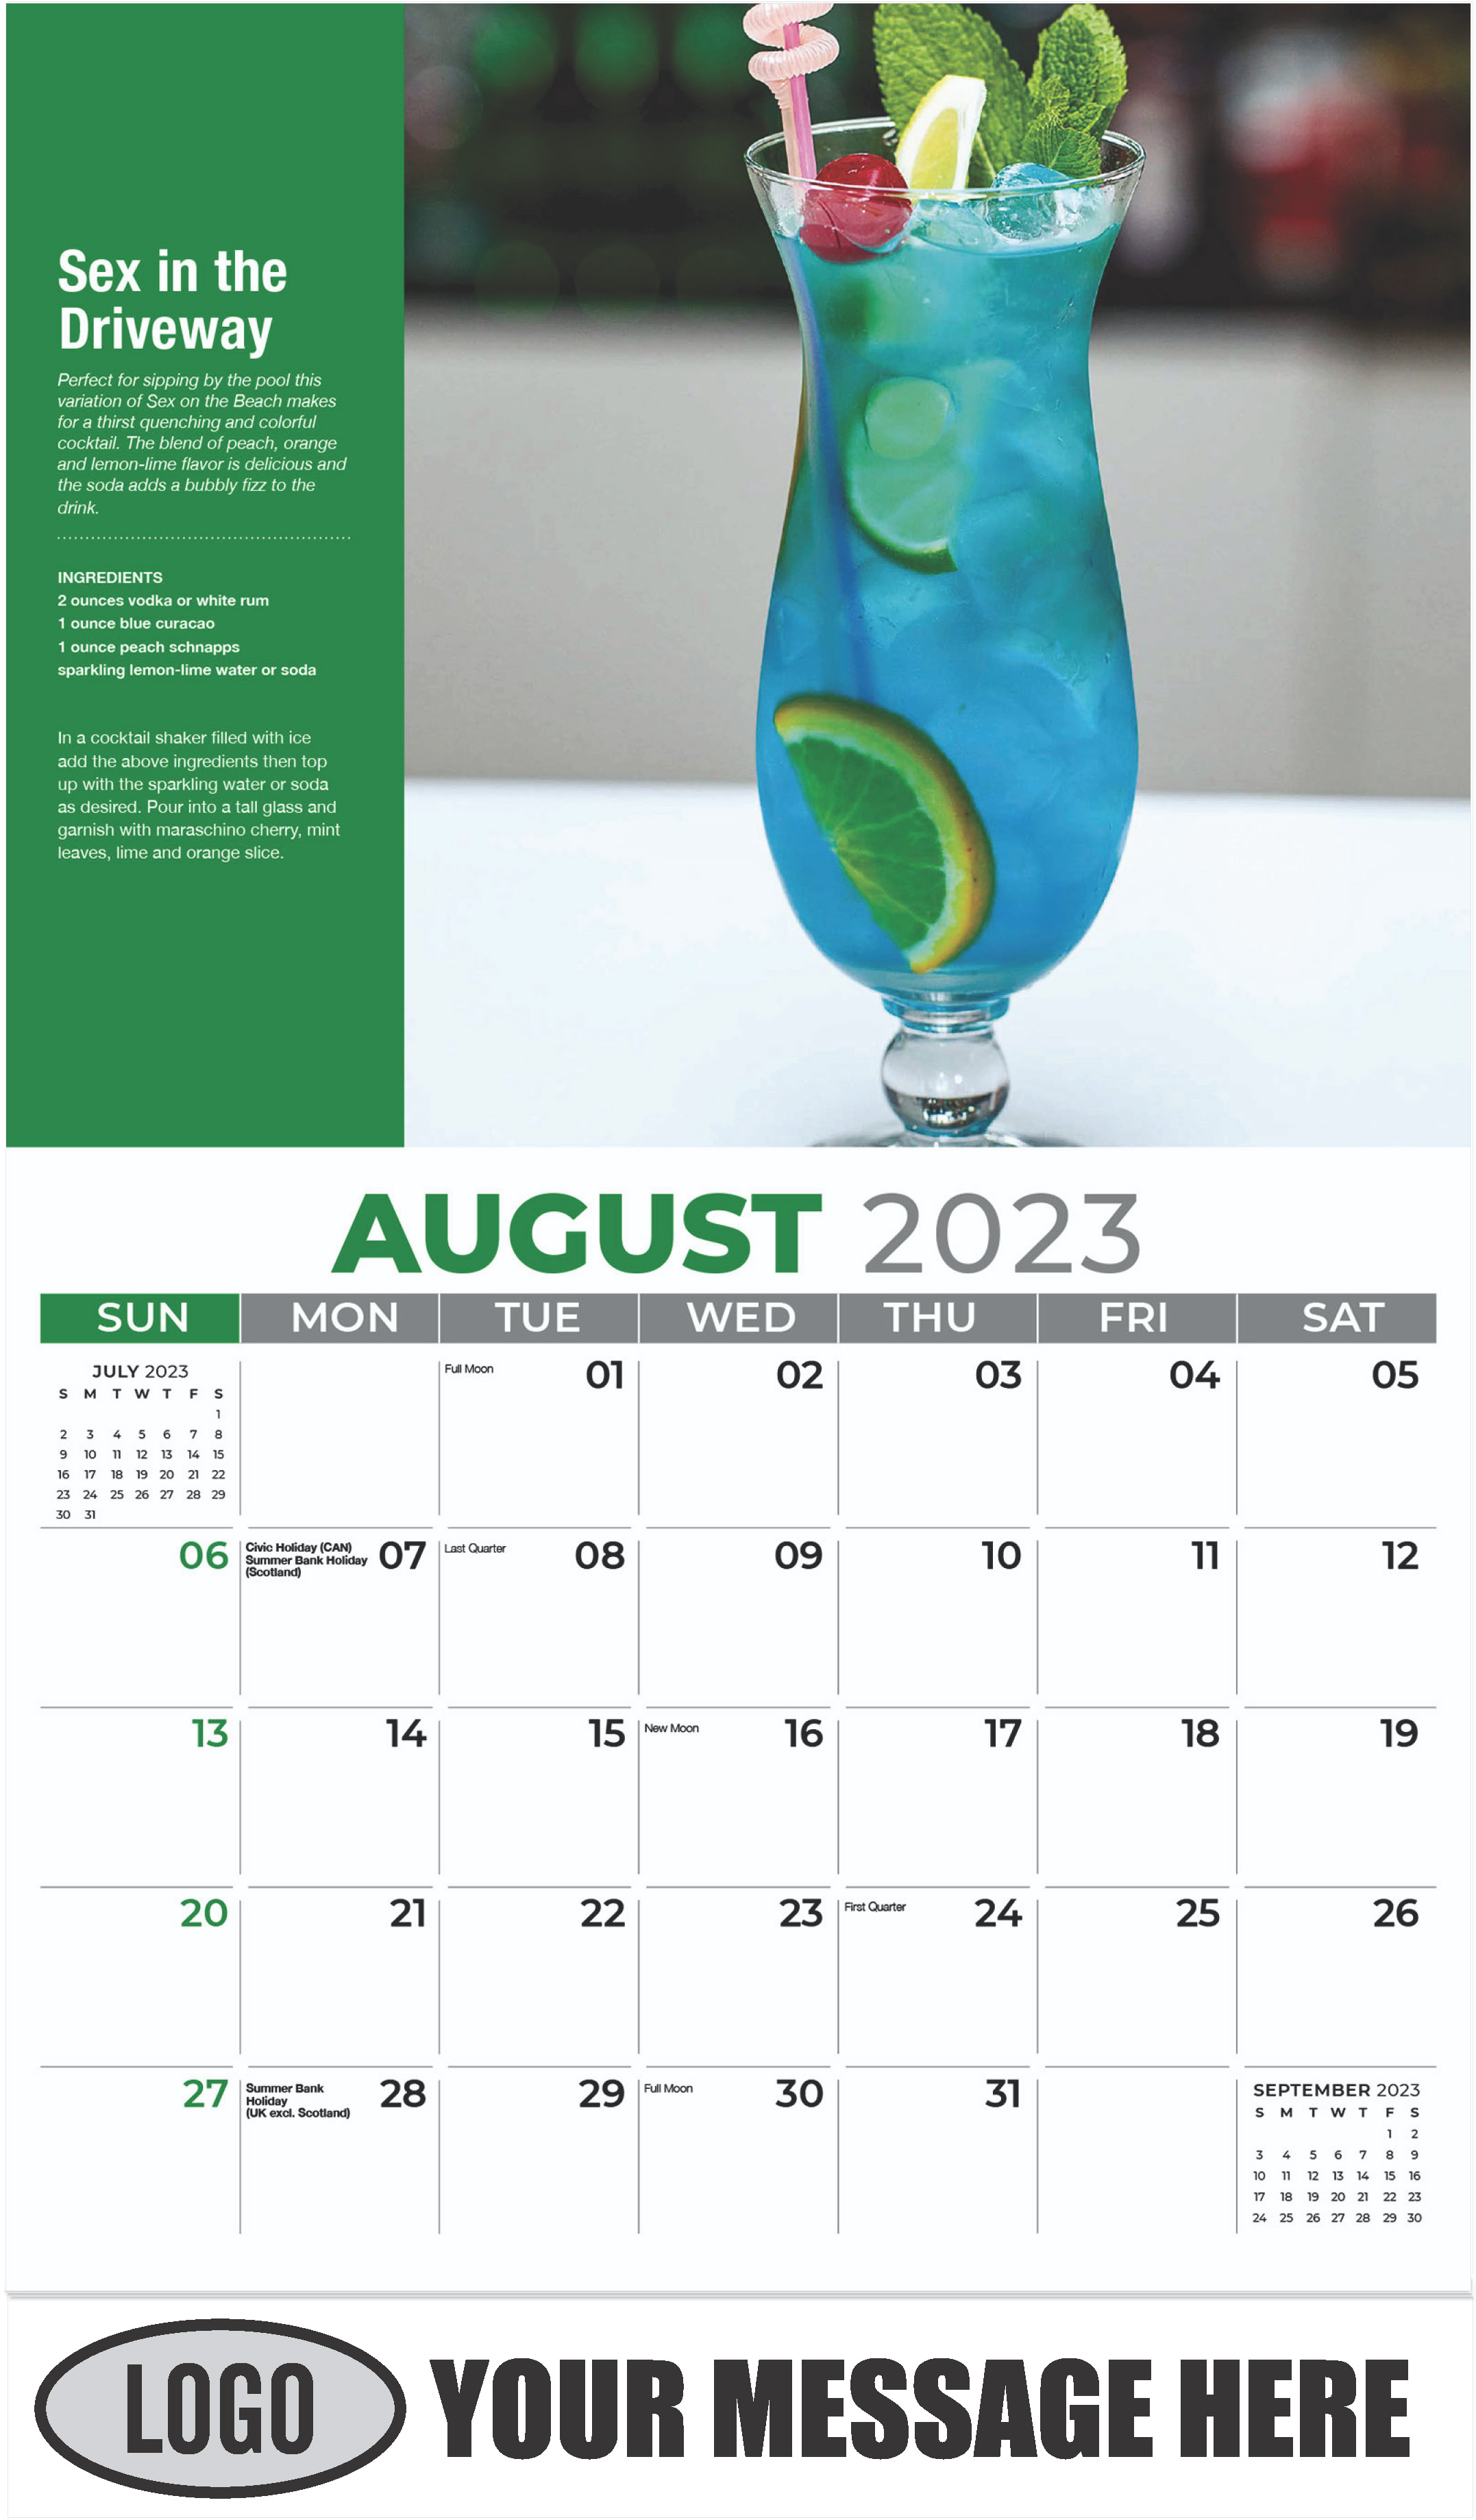 Sex in the Driveway - August - Happy Hour Cocktails 2023 Promotional Calendar